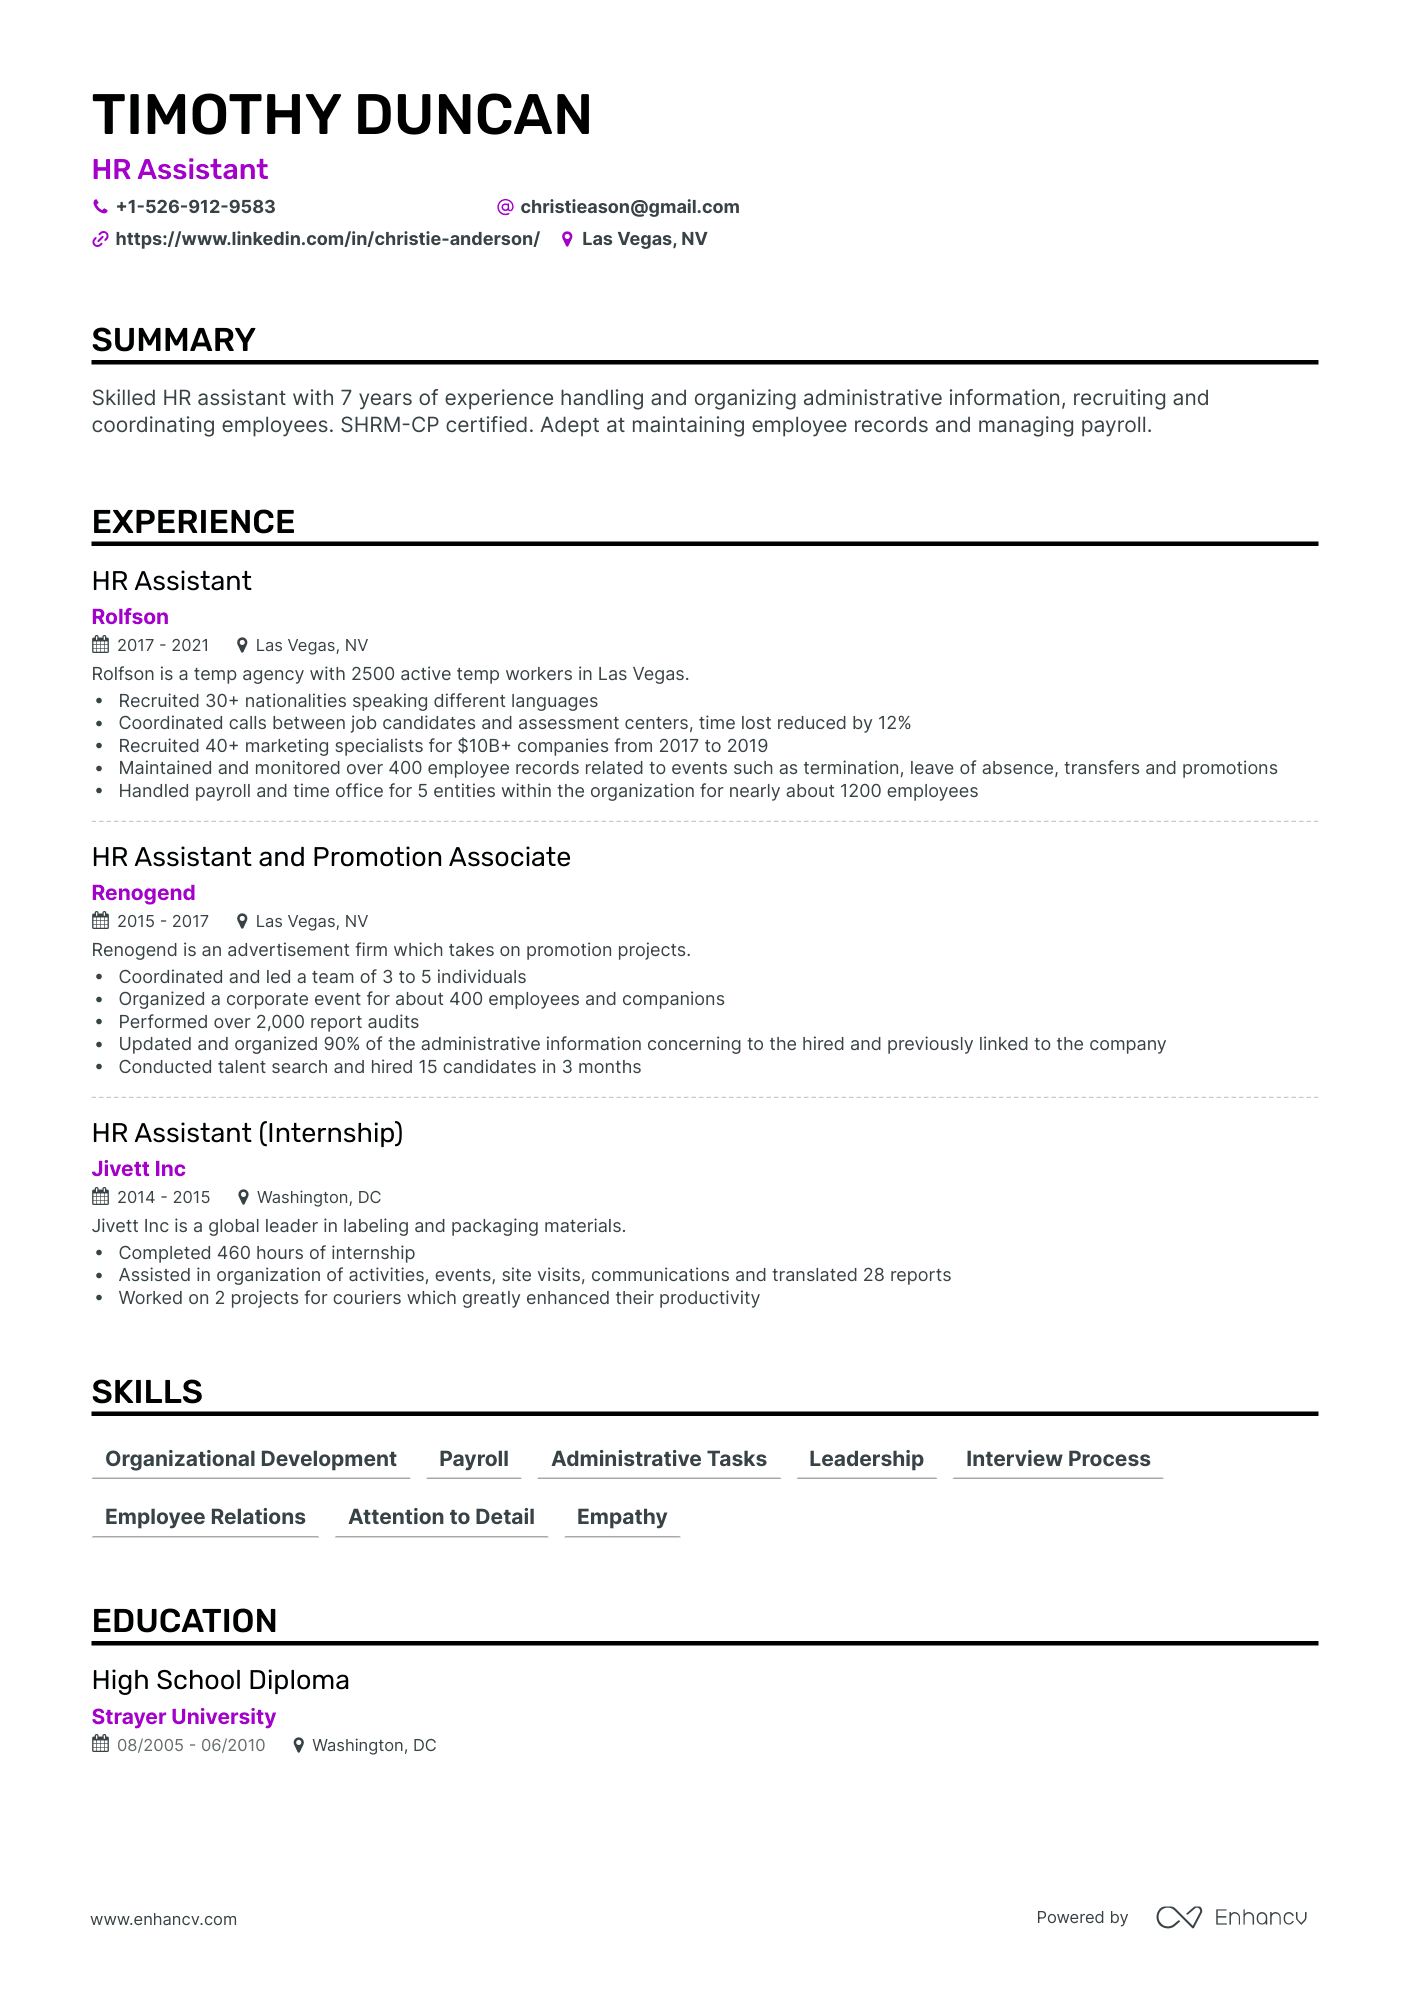 Classic HR Assistant Resume Template